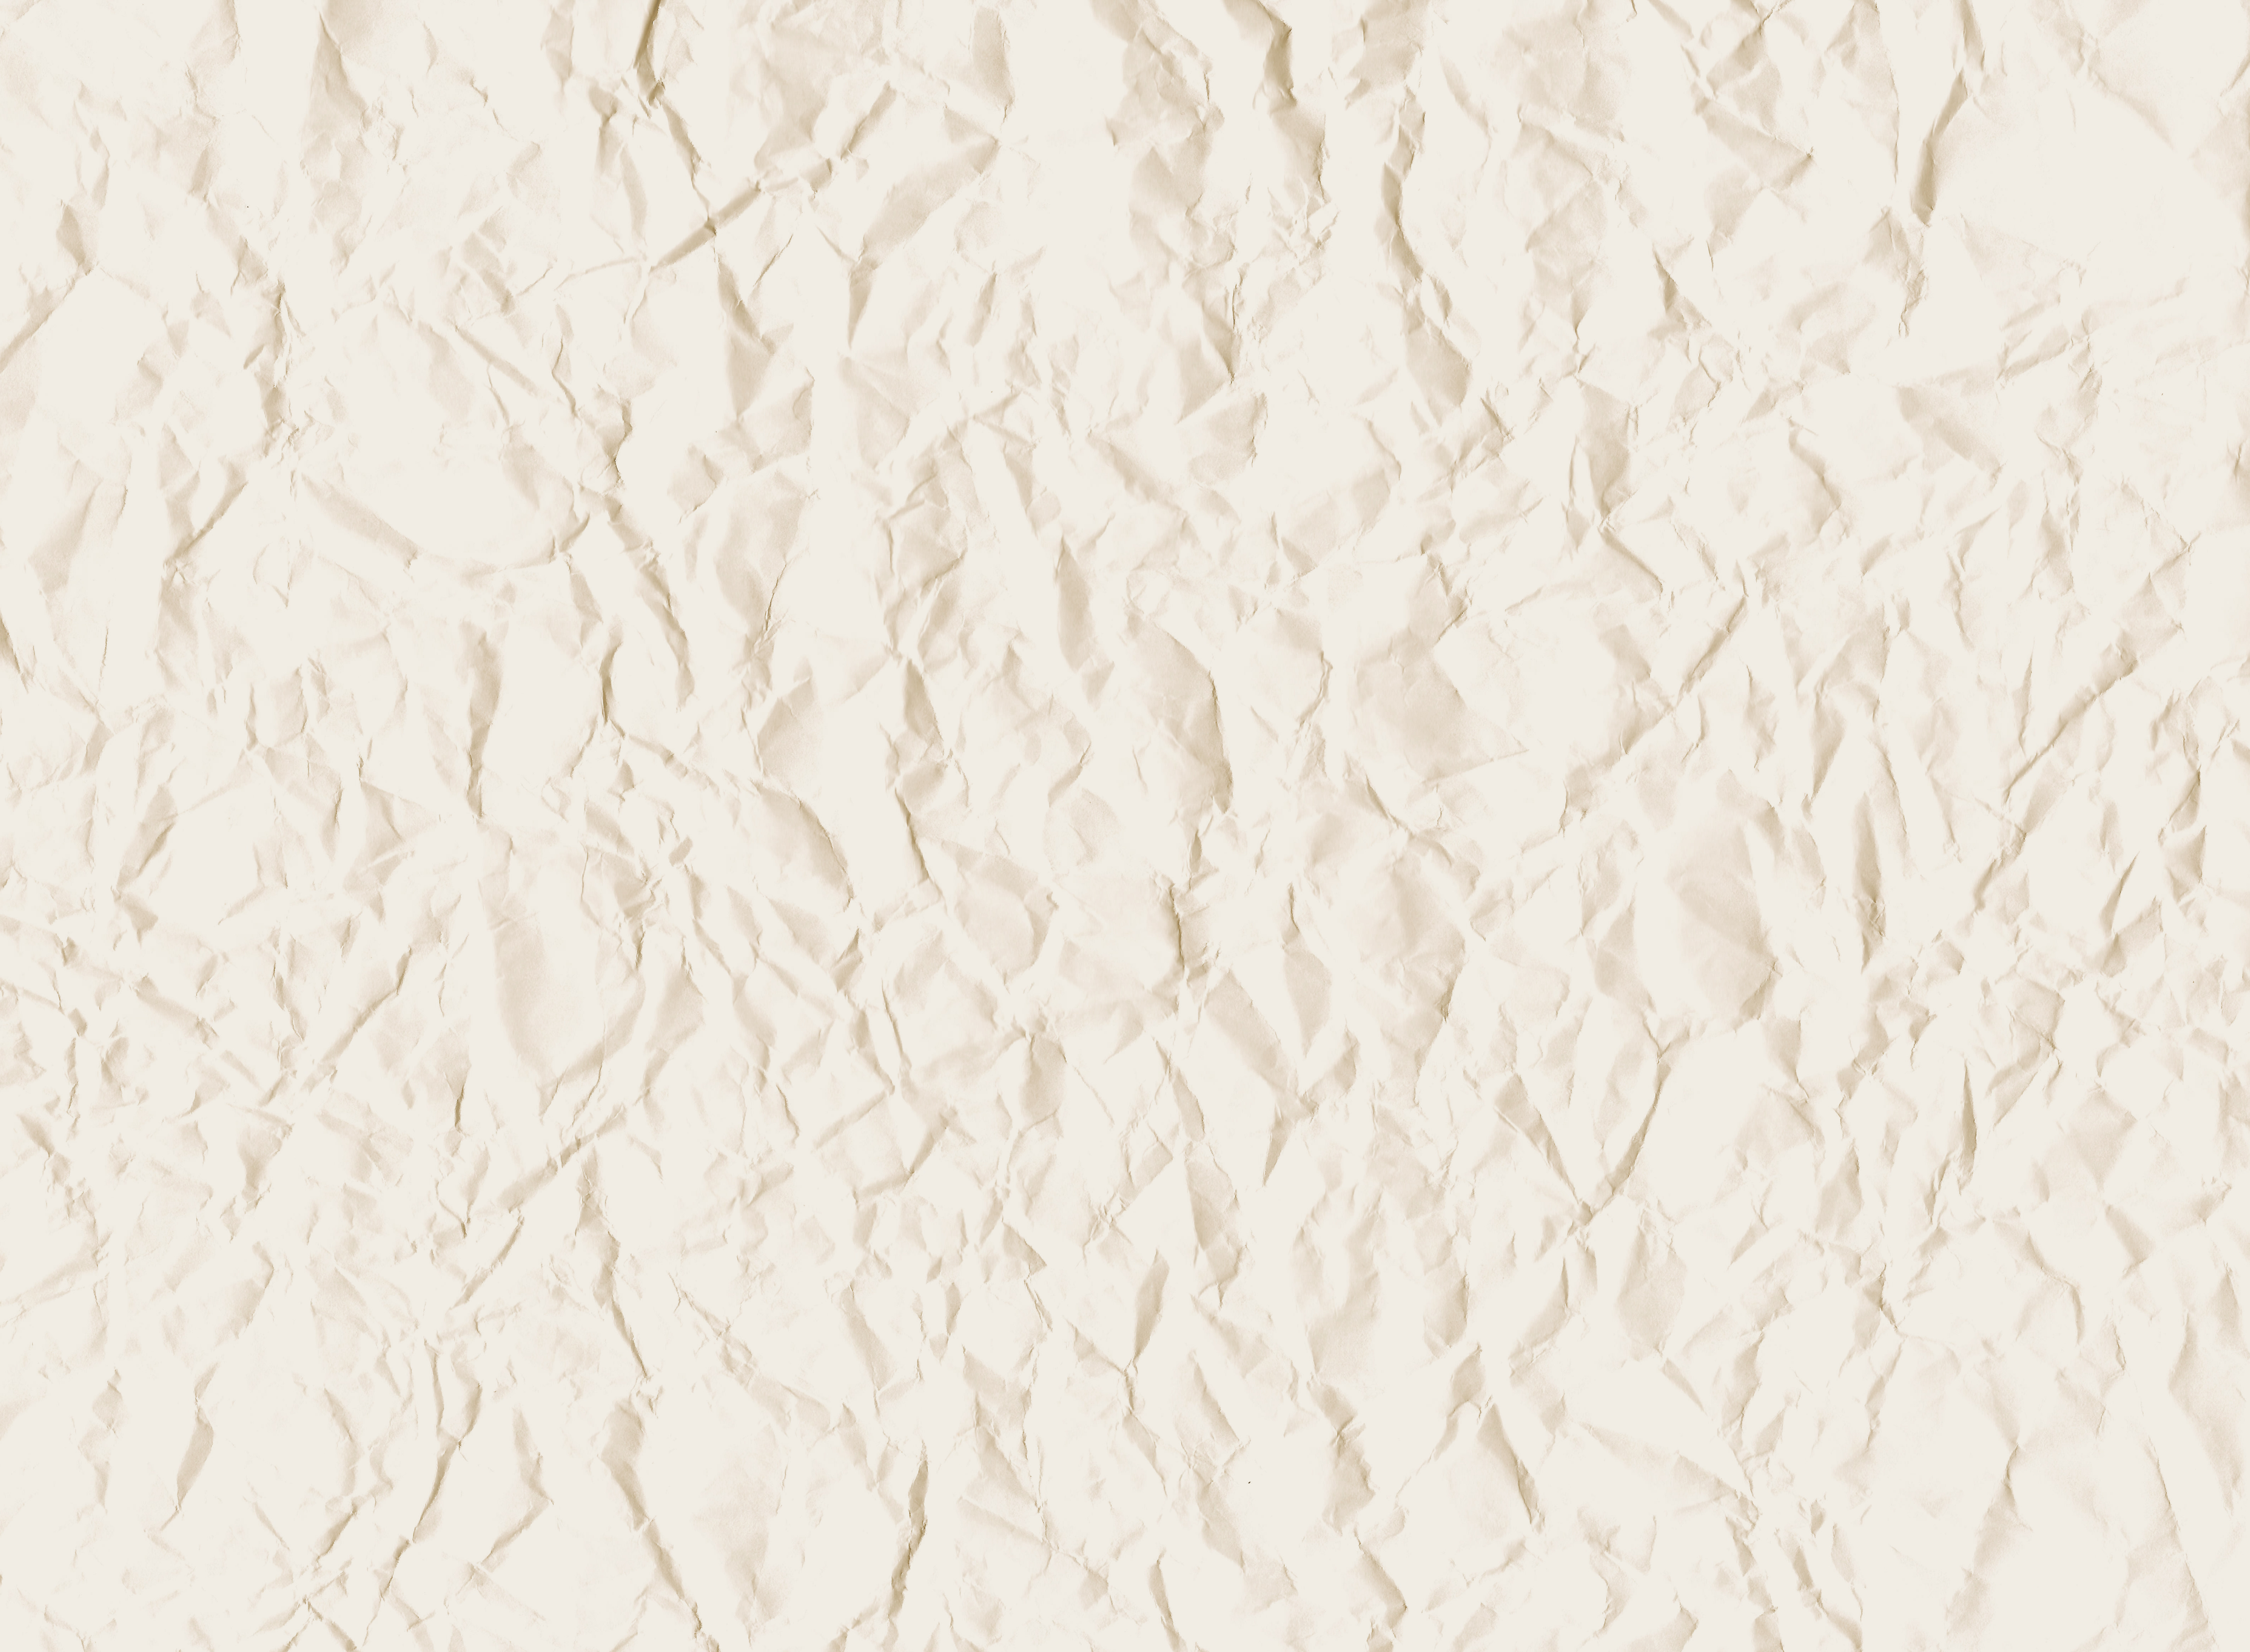 Ivory Off Wrinkled Paper Texture Picture | Free Photograph | Public Domain